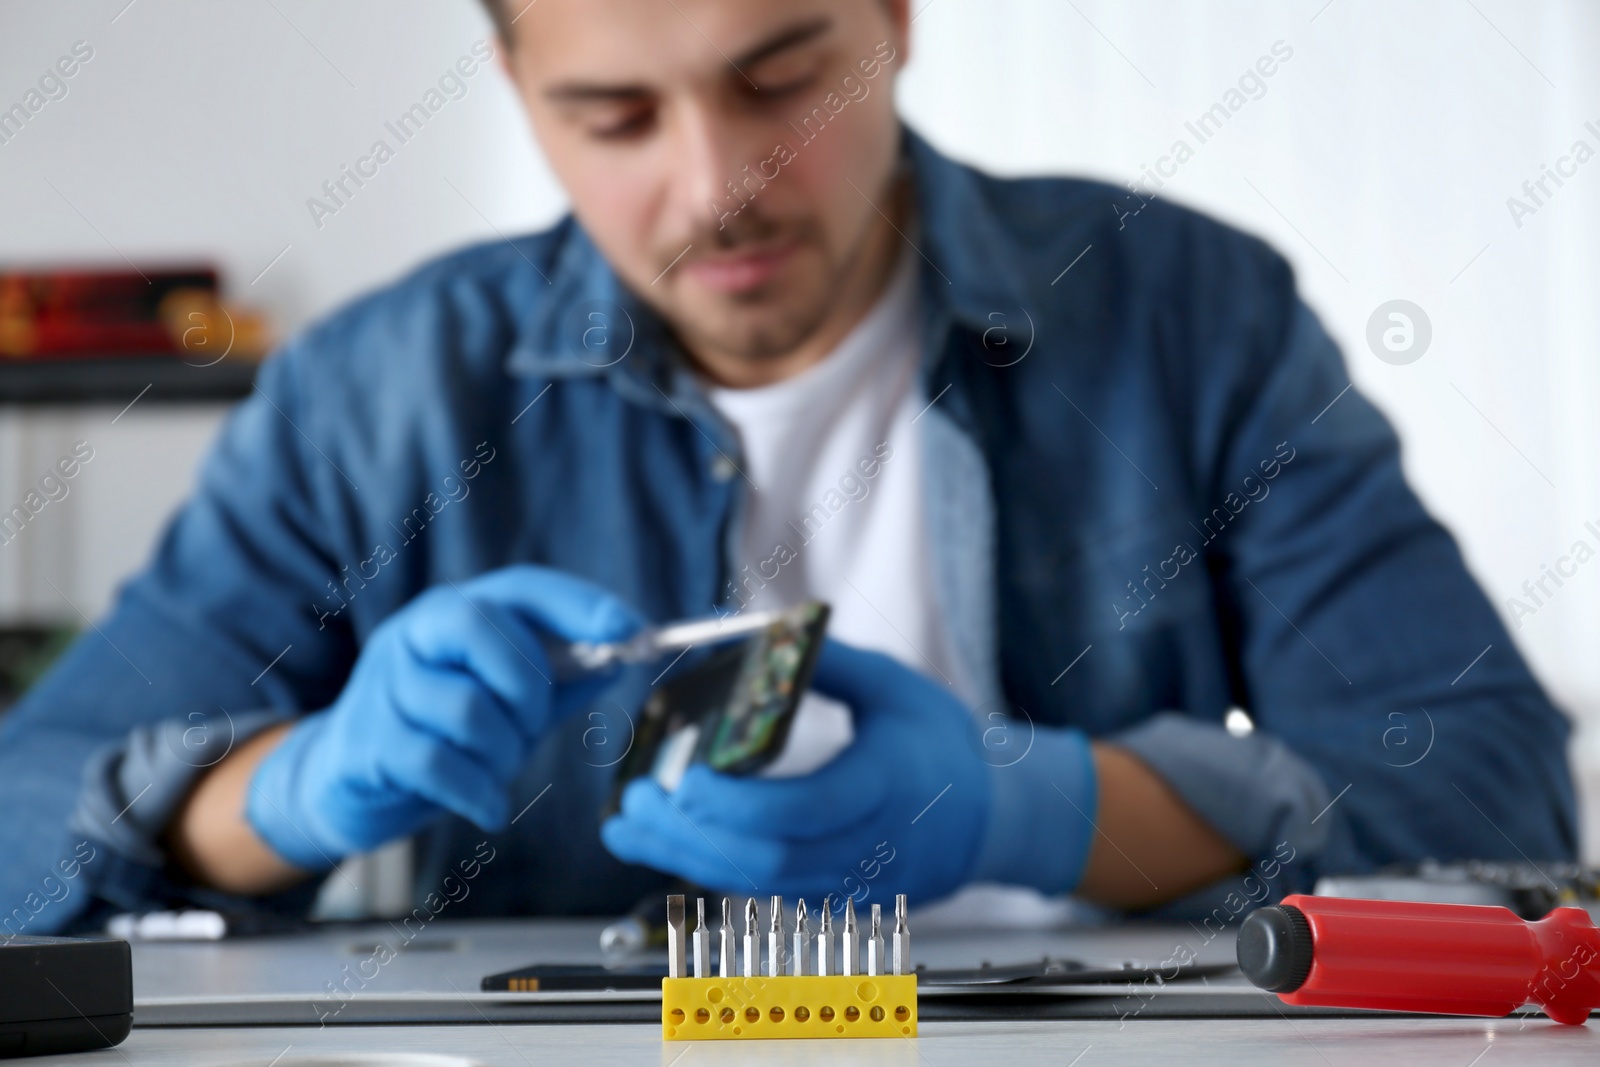 Photo of Technician repairing broken smartphone at table, focus on screwdriver security bits. Space for text